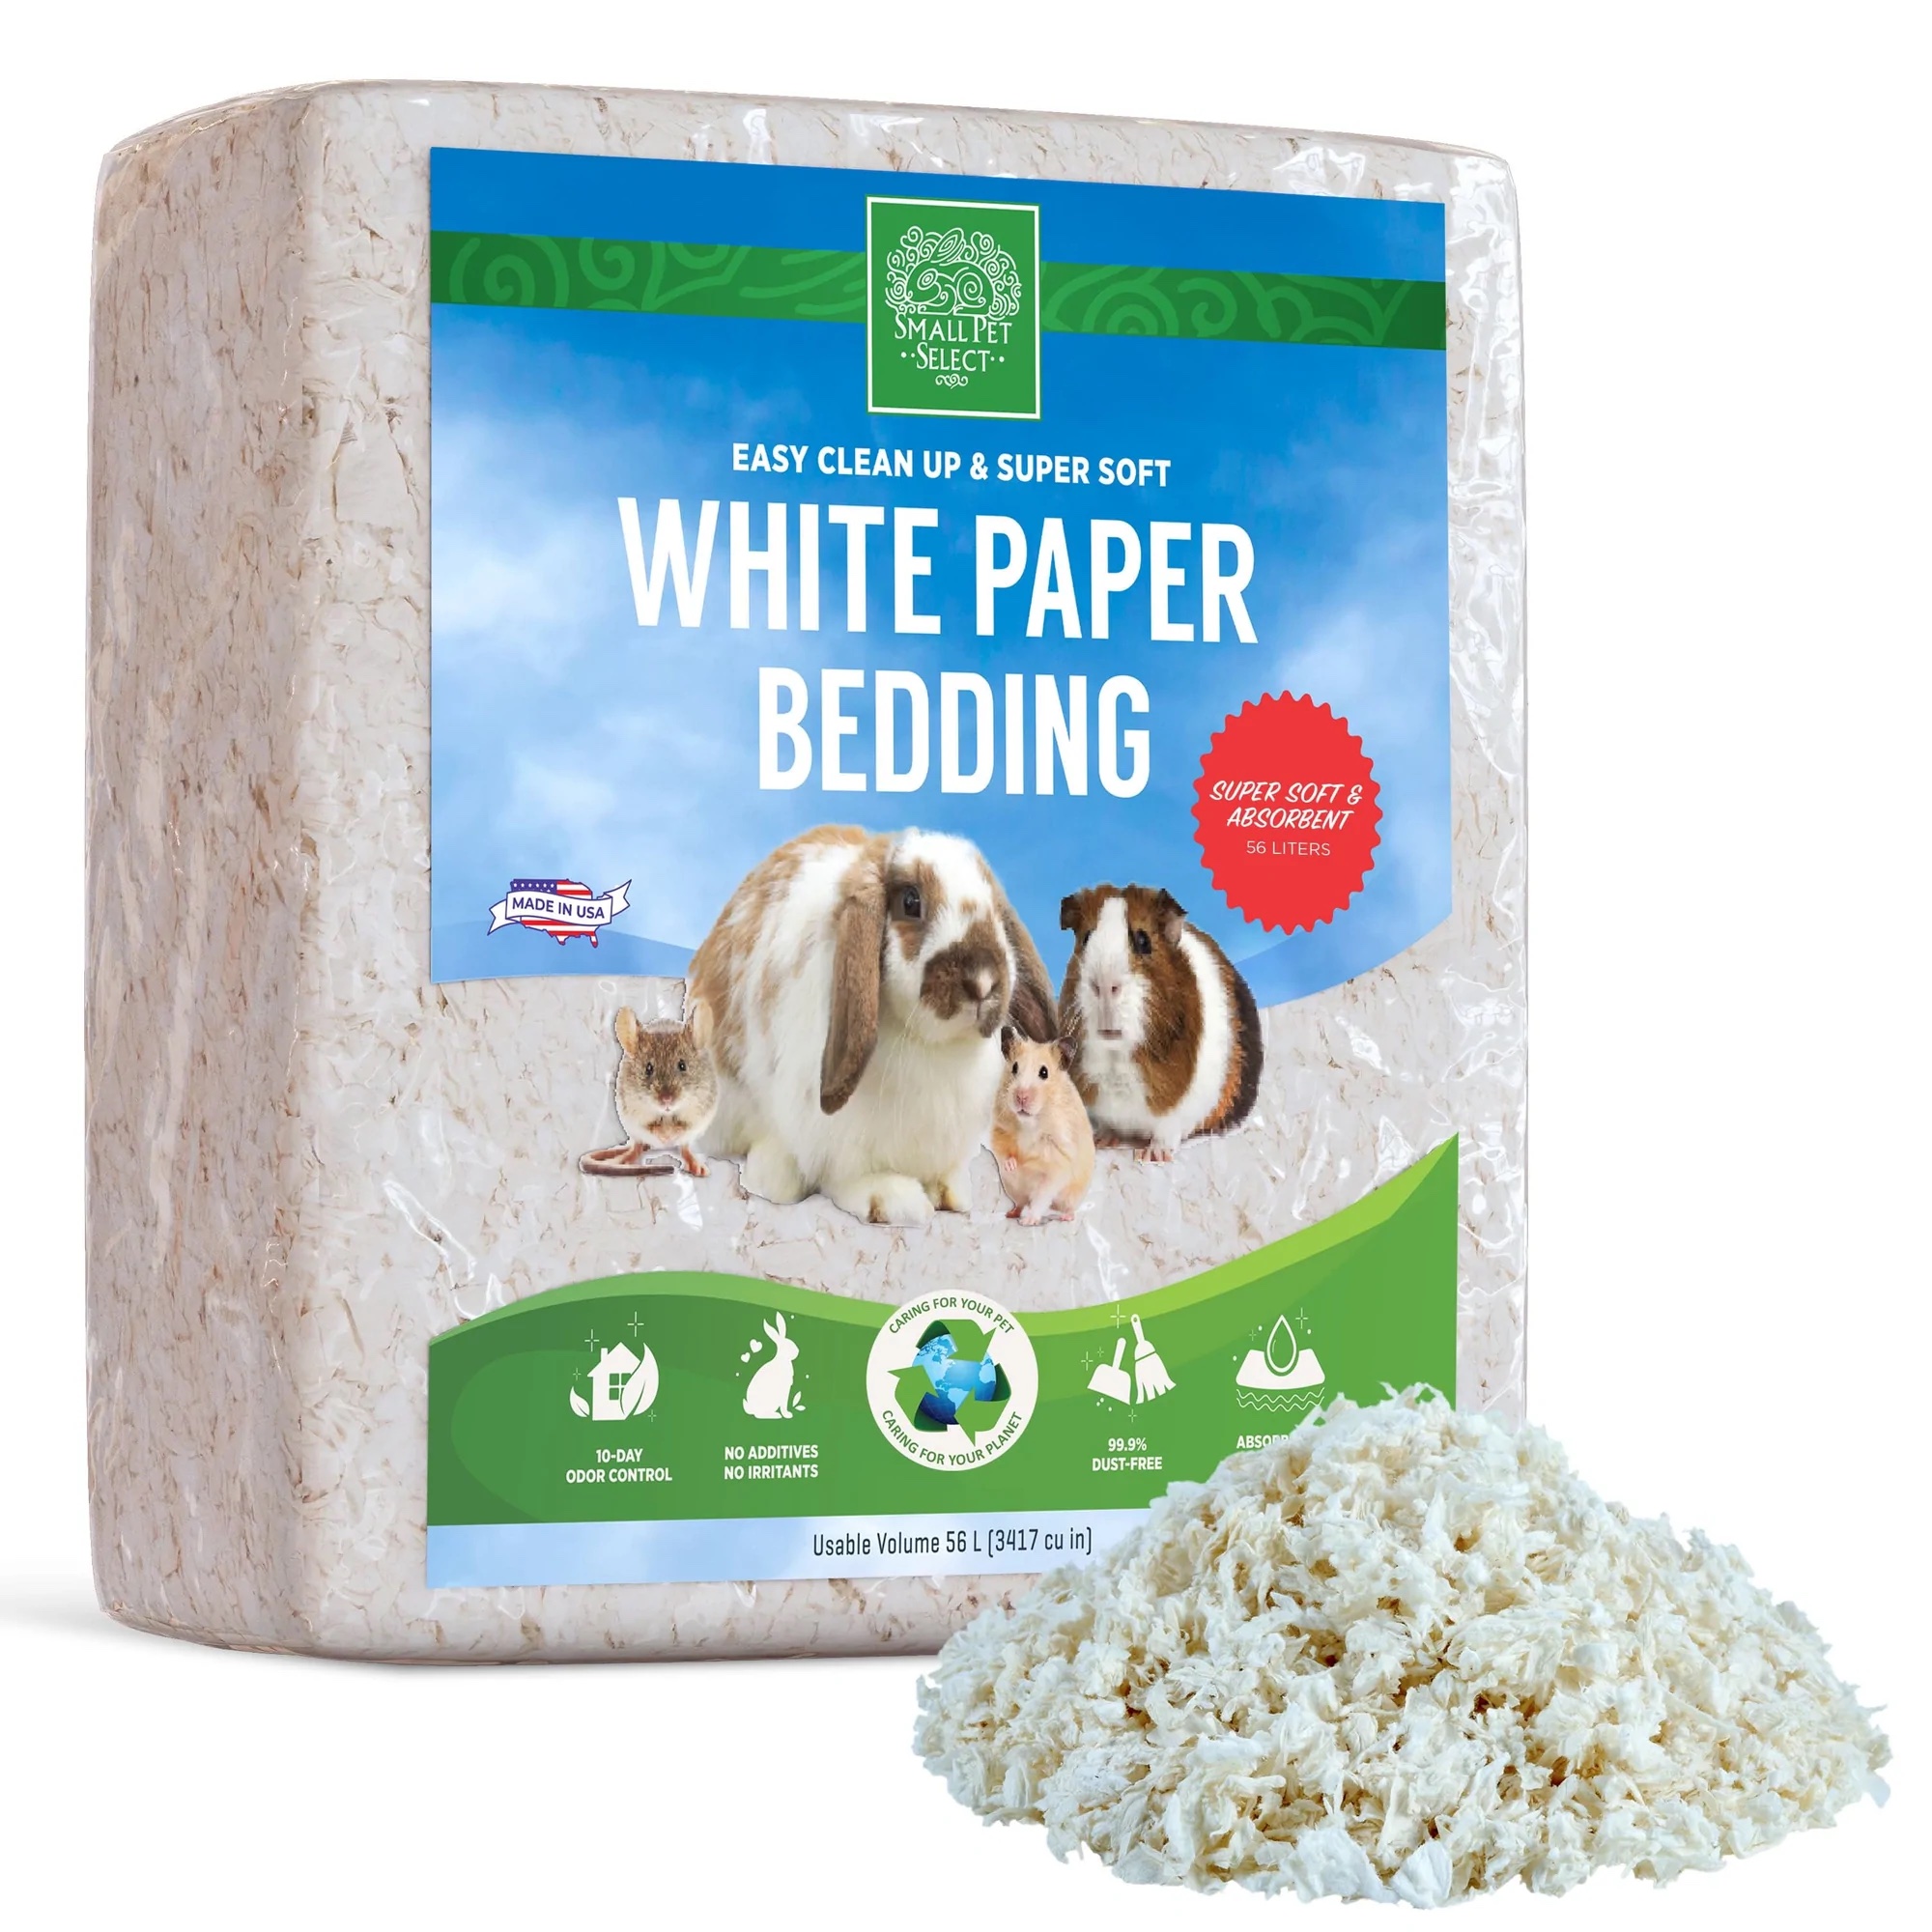 Bedding for Rats